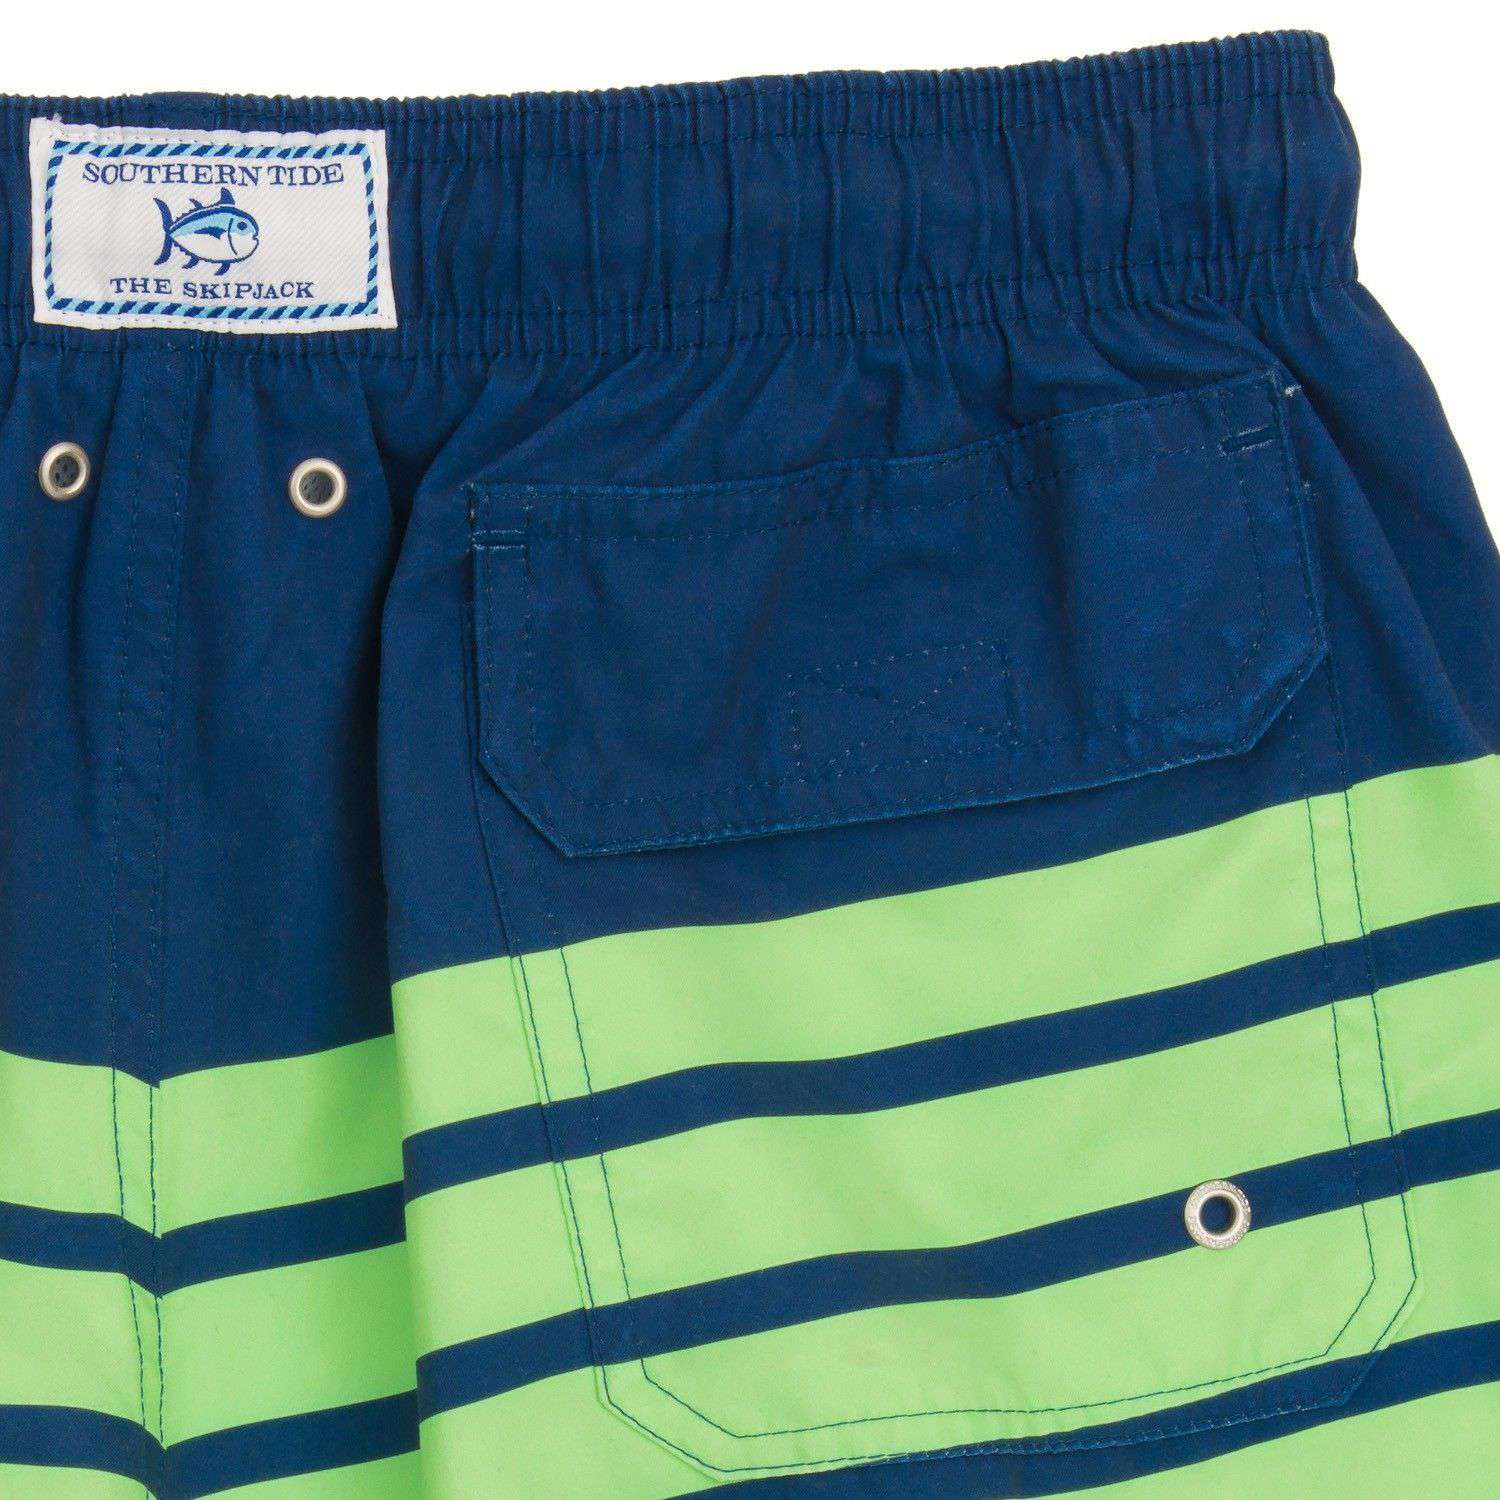 For Shore Stripe Swim Trunks in Yacht Blue/Island Green by Southern Tide - Country Club Prep